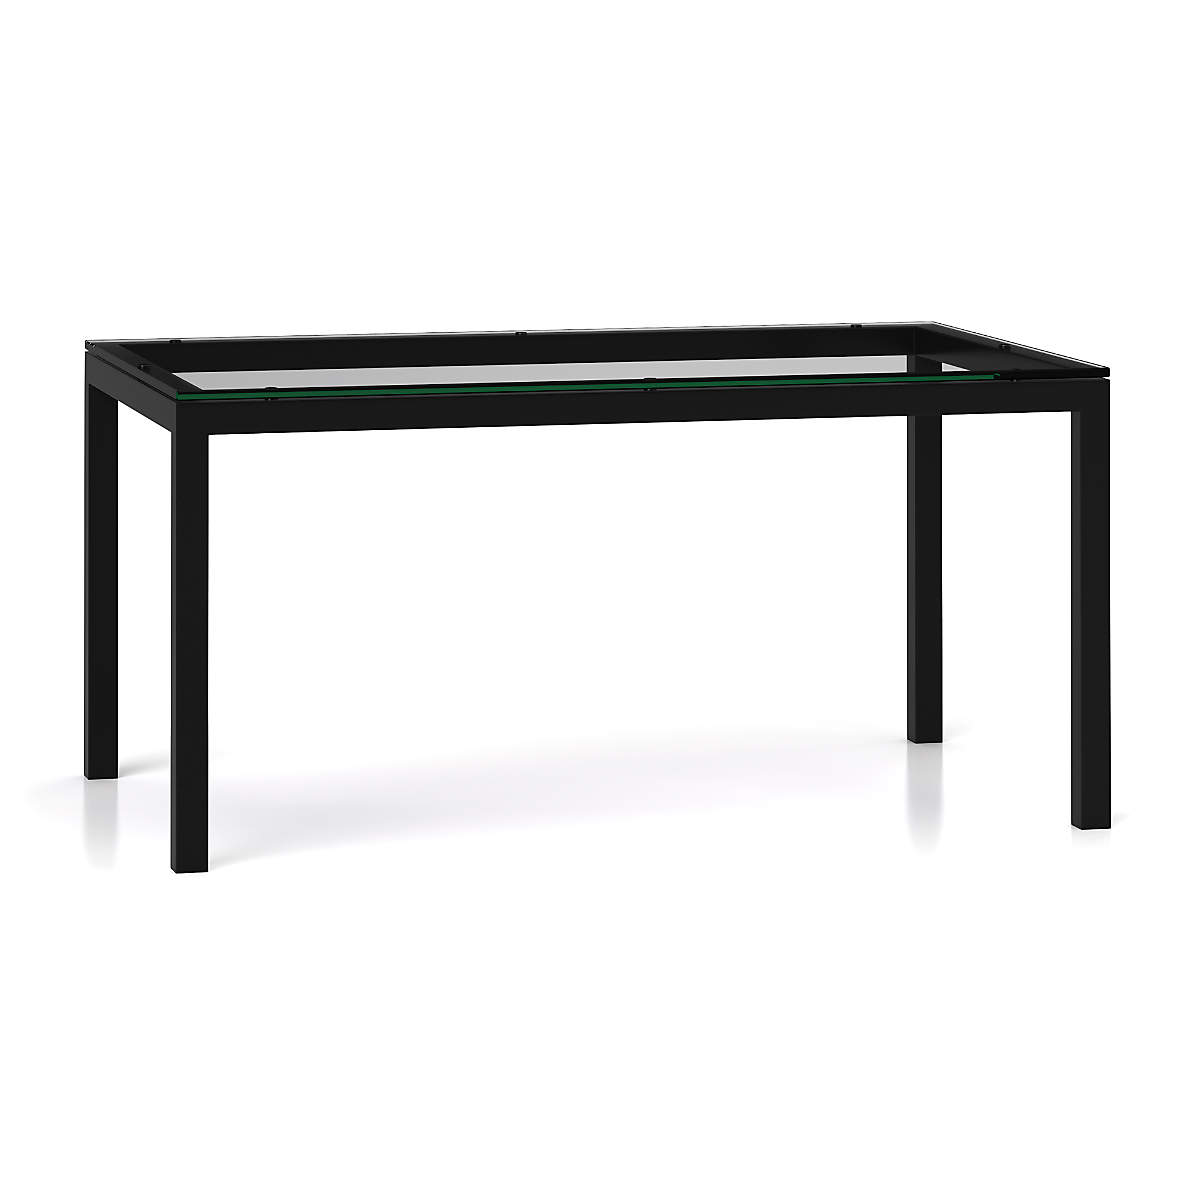 Parsons Clear Glass Top Dark Steel Base Dining Tables Crate And Barrel